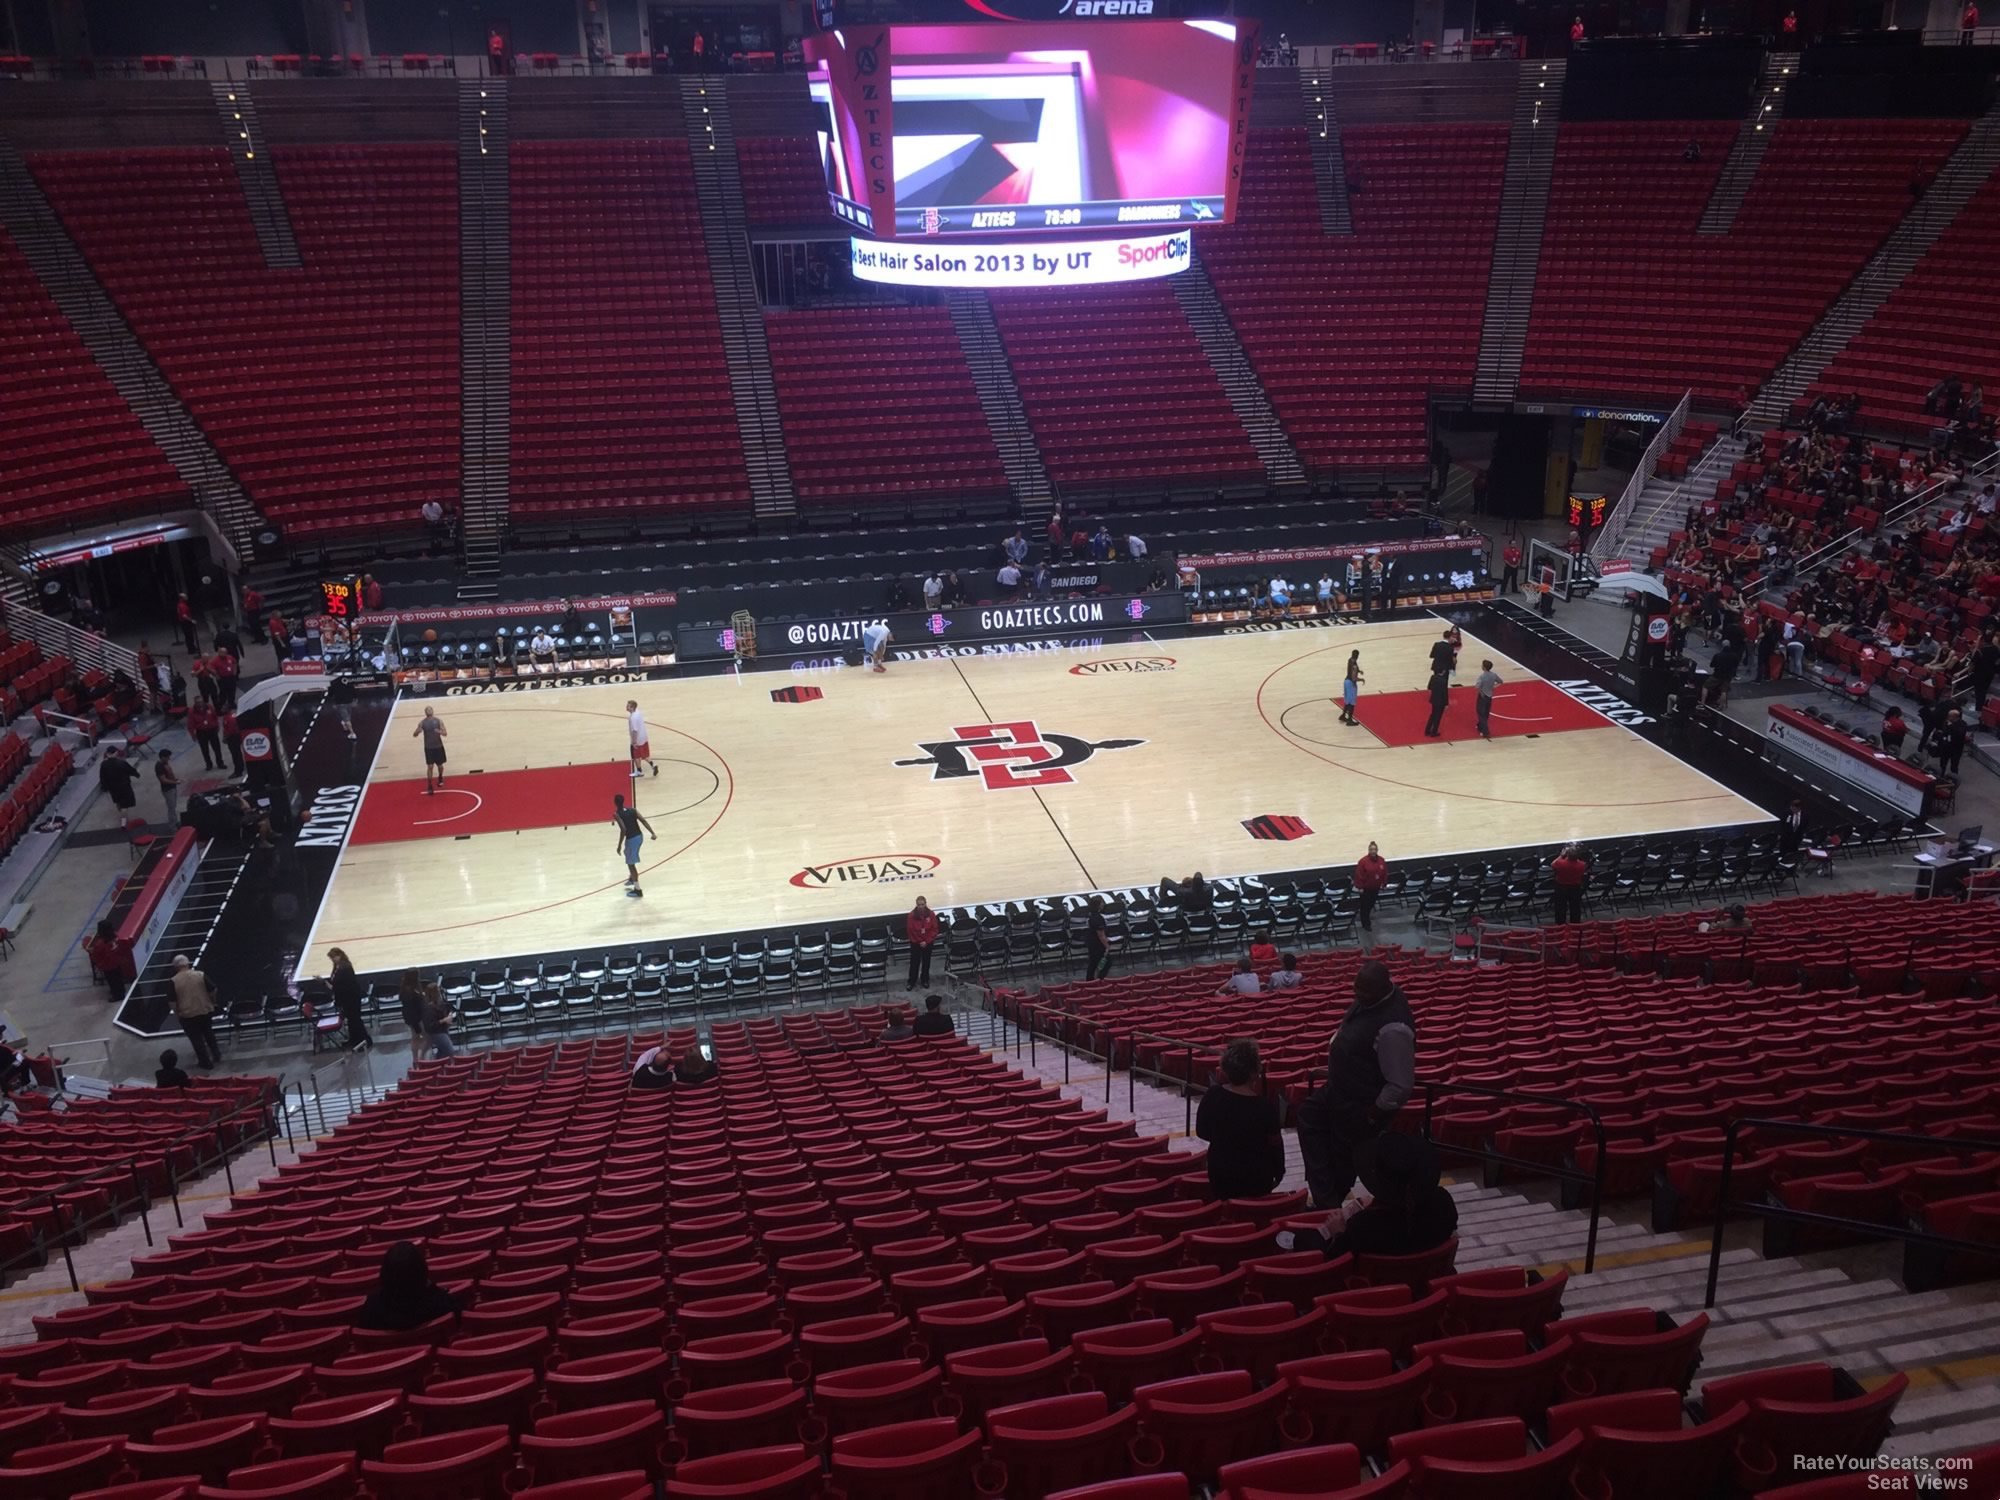 Viejas Arena Seating Chart